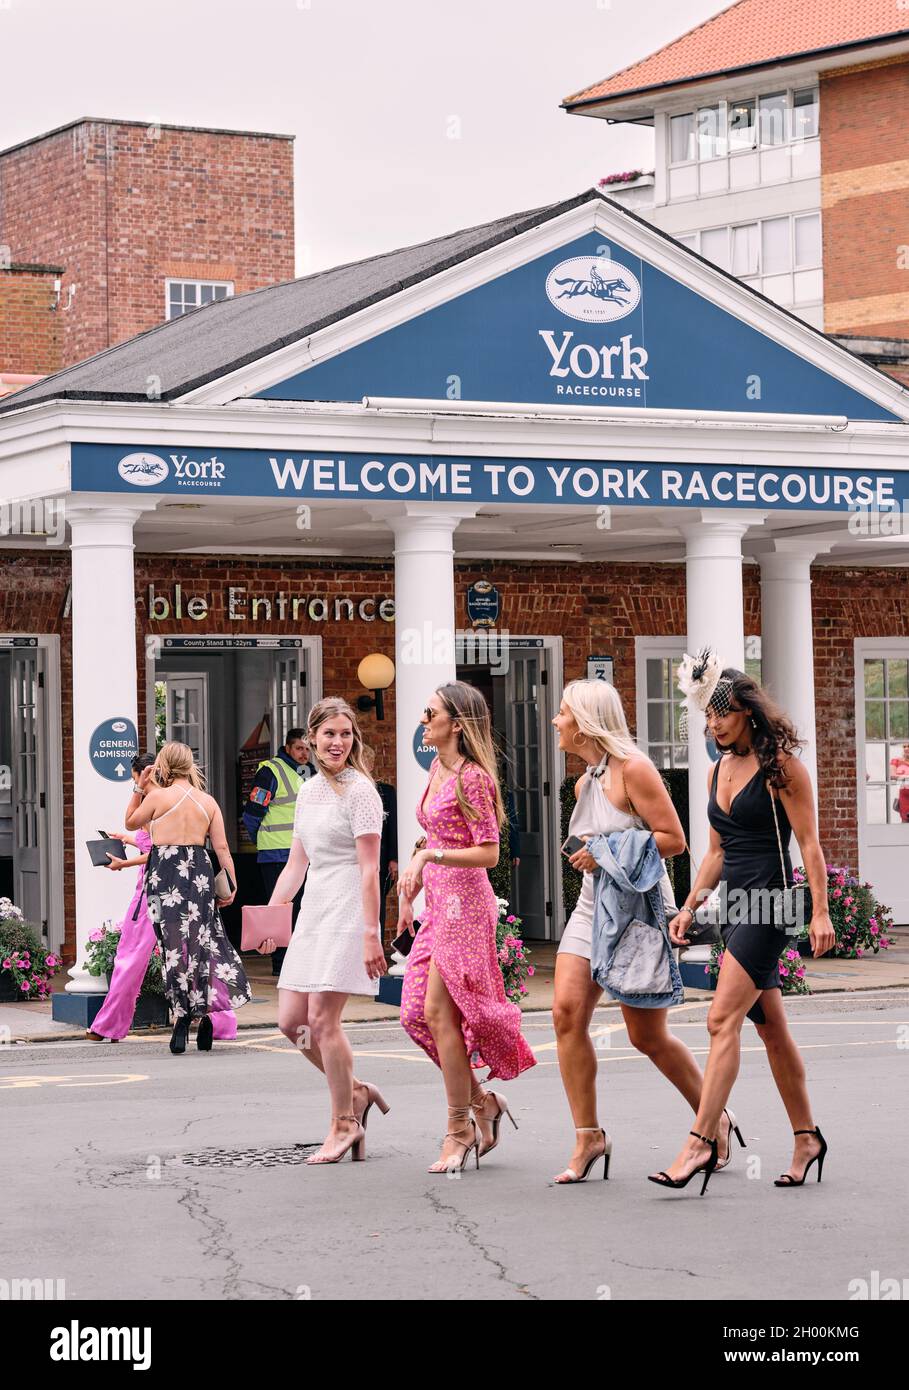 A day at the races - Racegoers all dressed up for a day's horse racing on a summer weekend event at York Racecourse York,Yorkshire, England UK 2021 Stock Photo